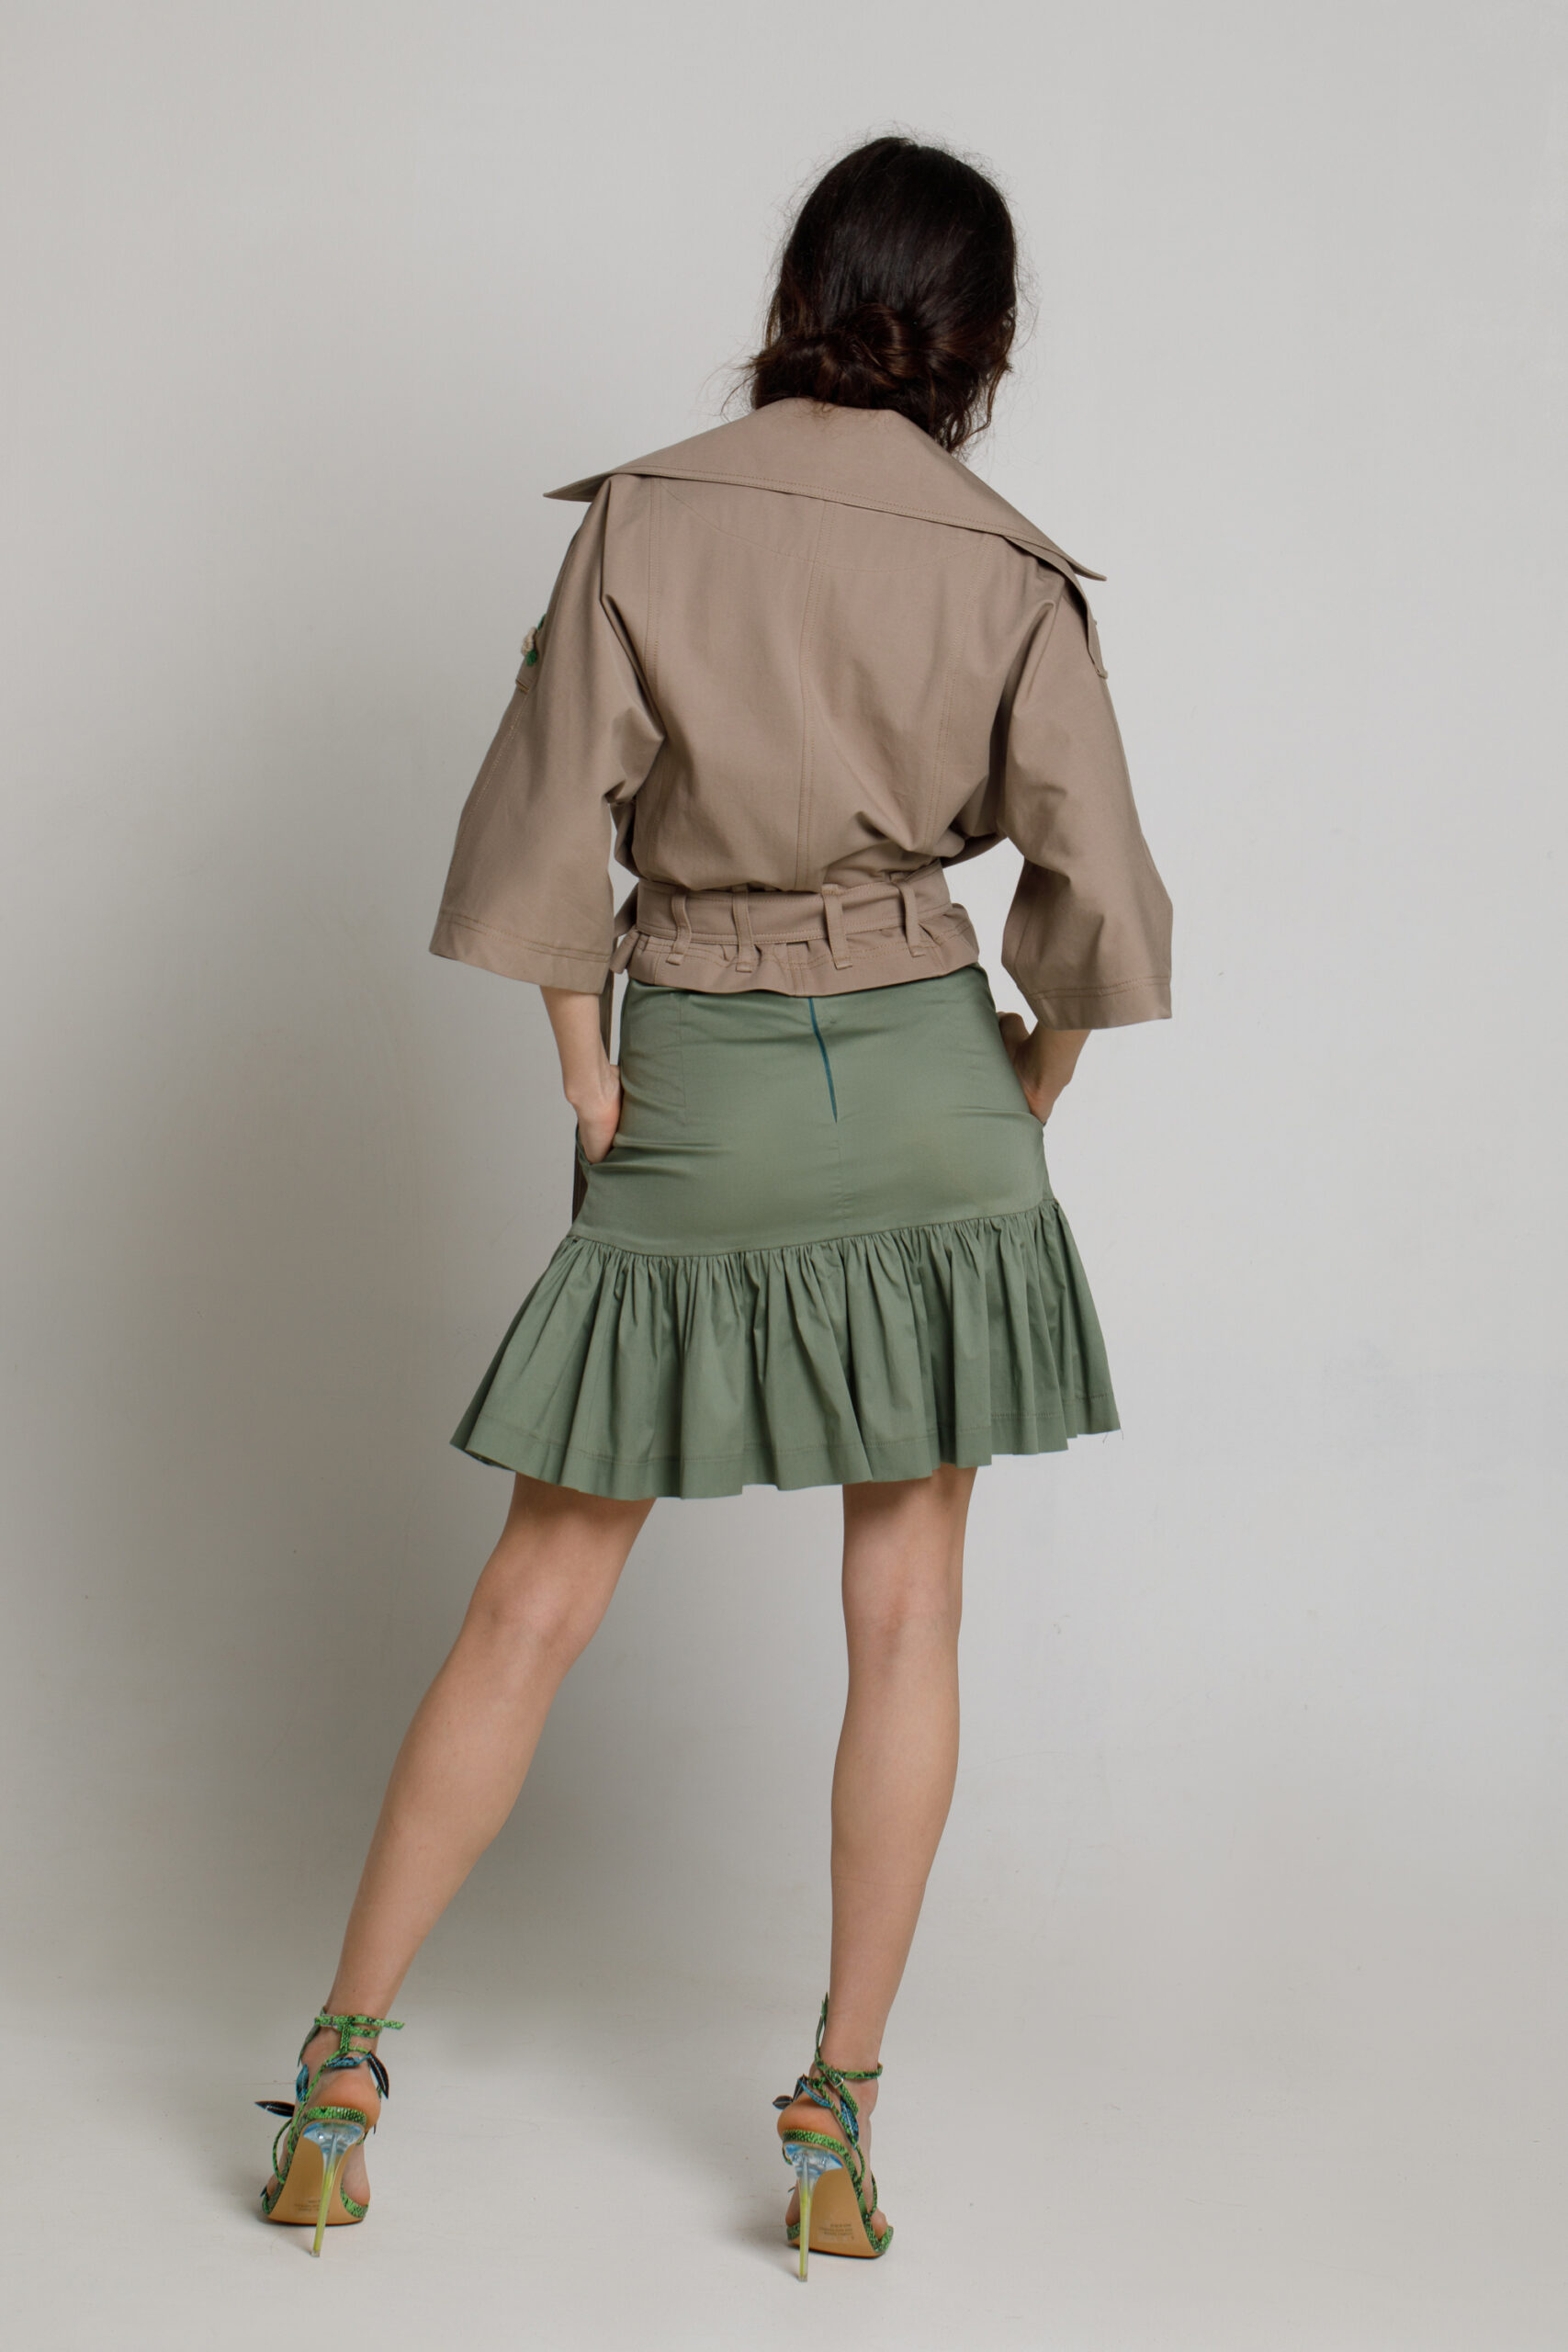 ISTINA short green casual skirt with frill and chains. Natural fabrics, original design, handmade embroidery